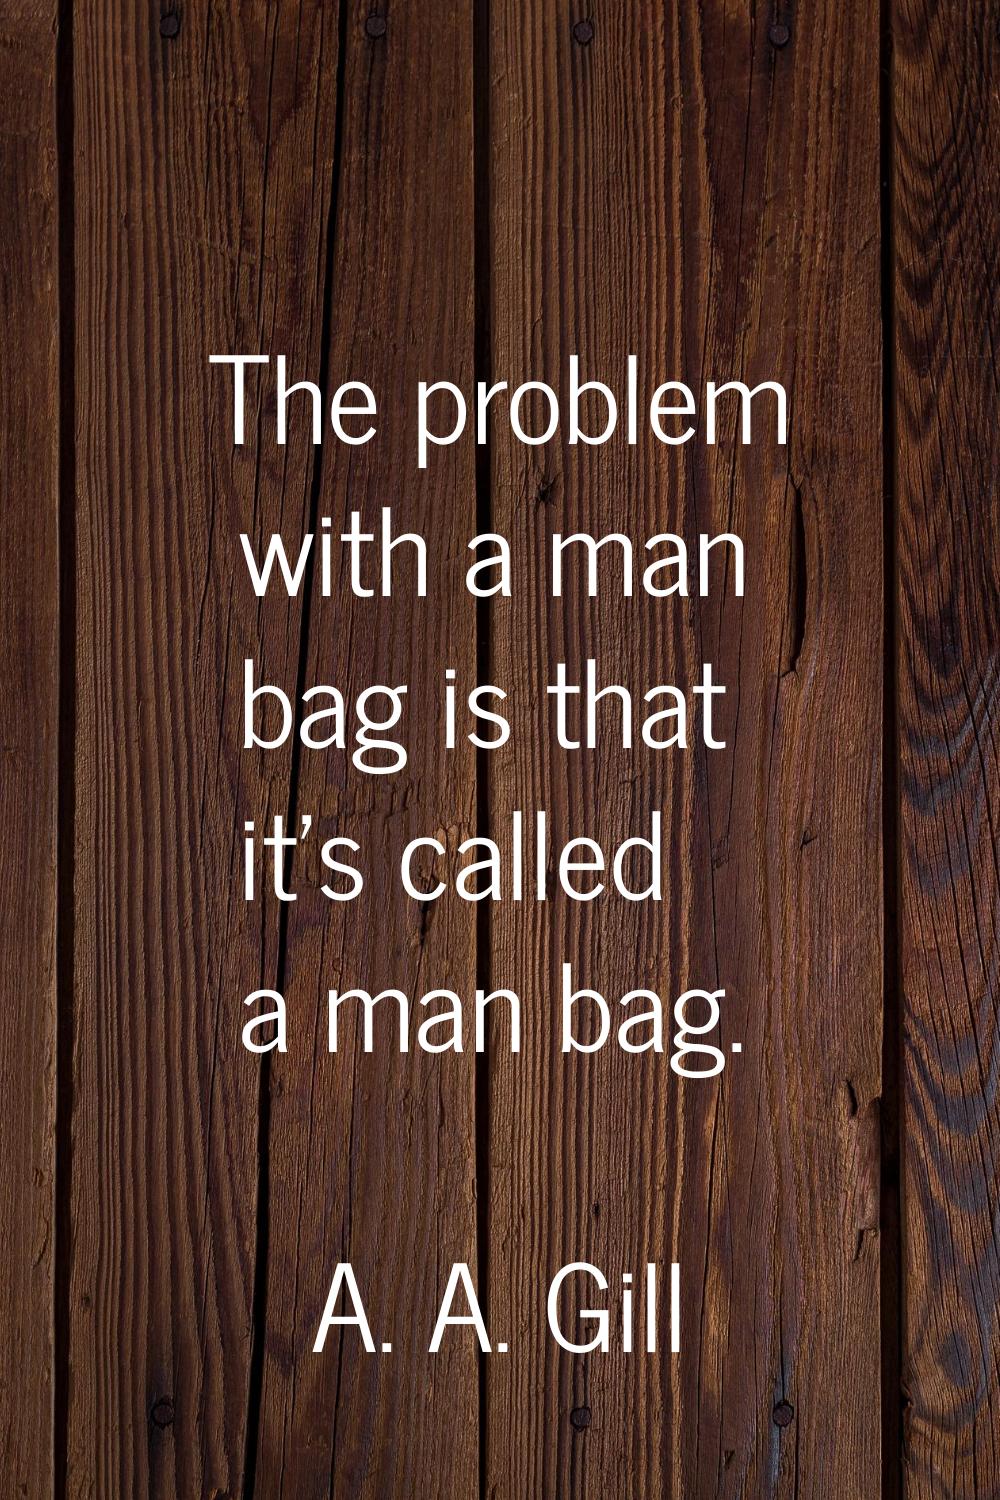 The problem with a man bag is that it's called a man bag.